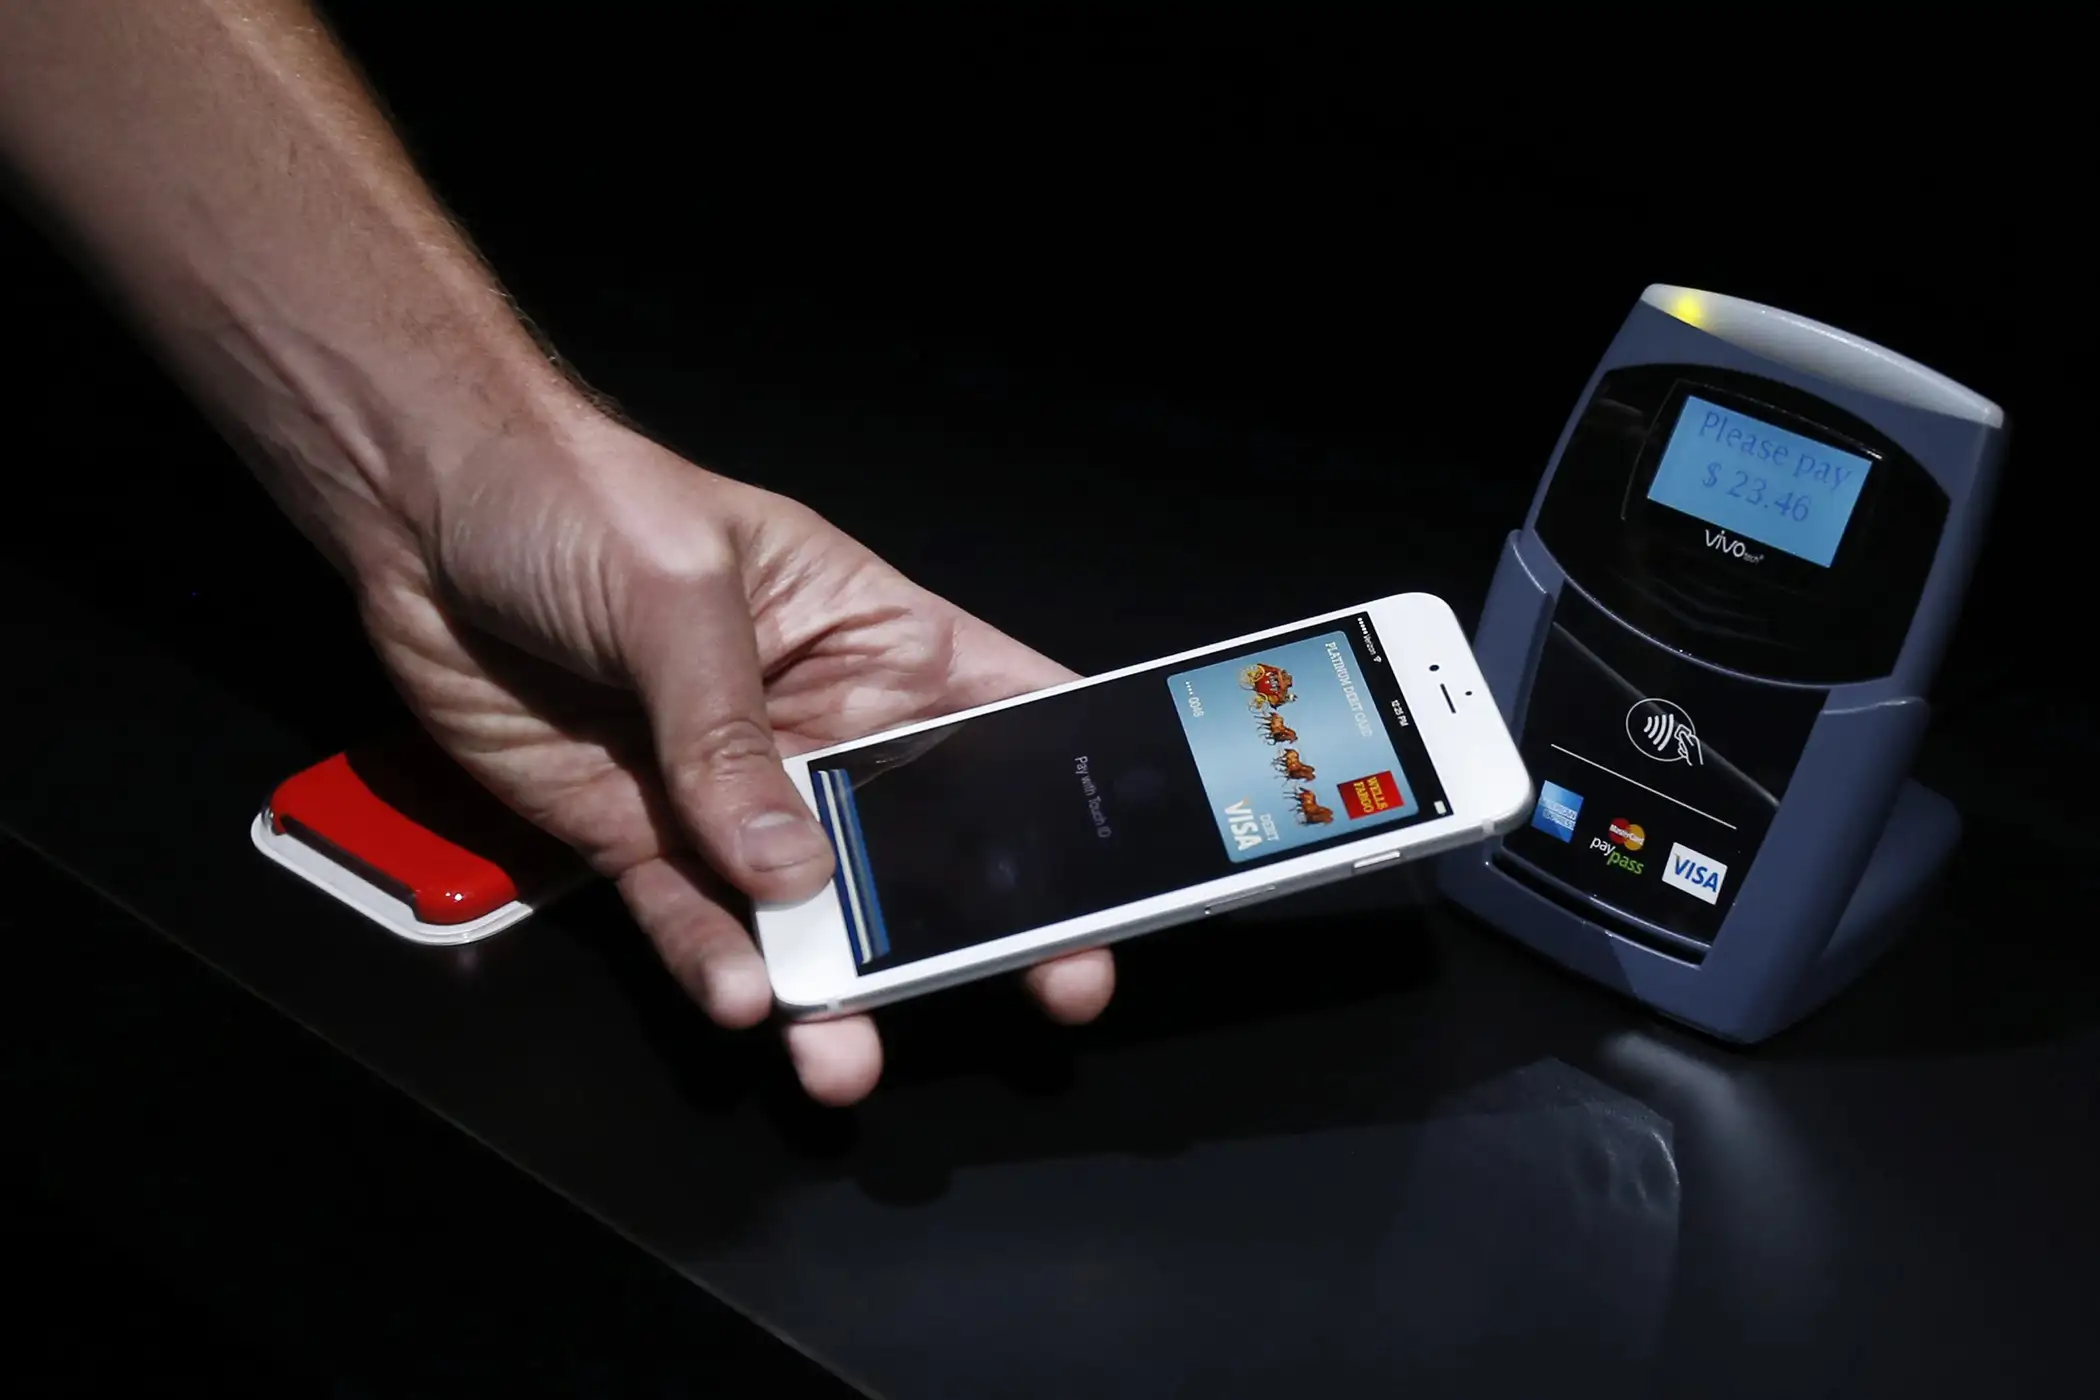 Demonstration on how the new Apple Pay works during Apple's launch event at the Flint Center for the Performing Arts in Cupertino, California, September 9, 2014.